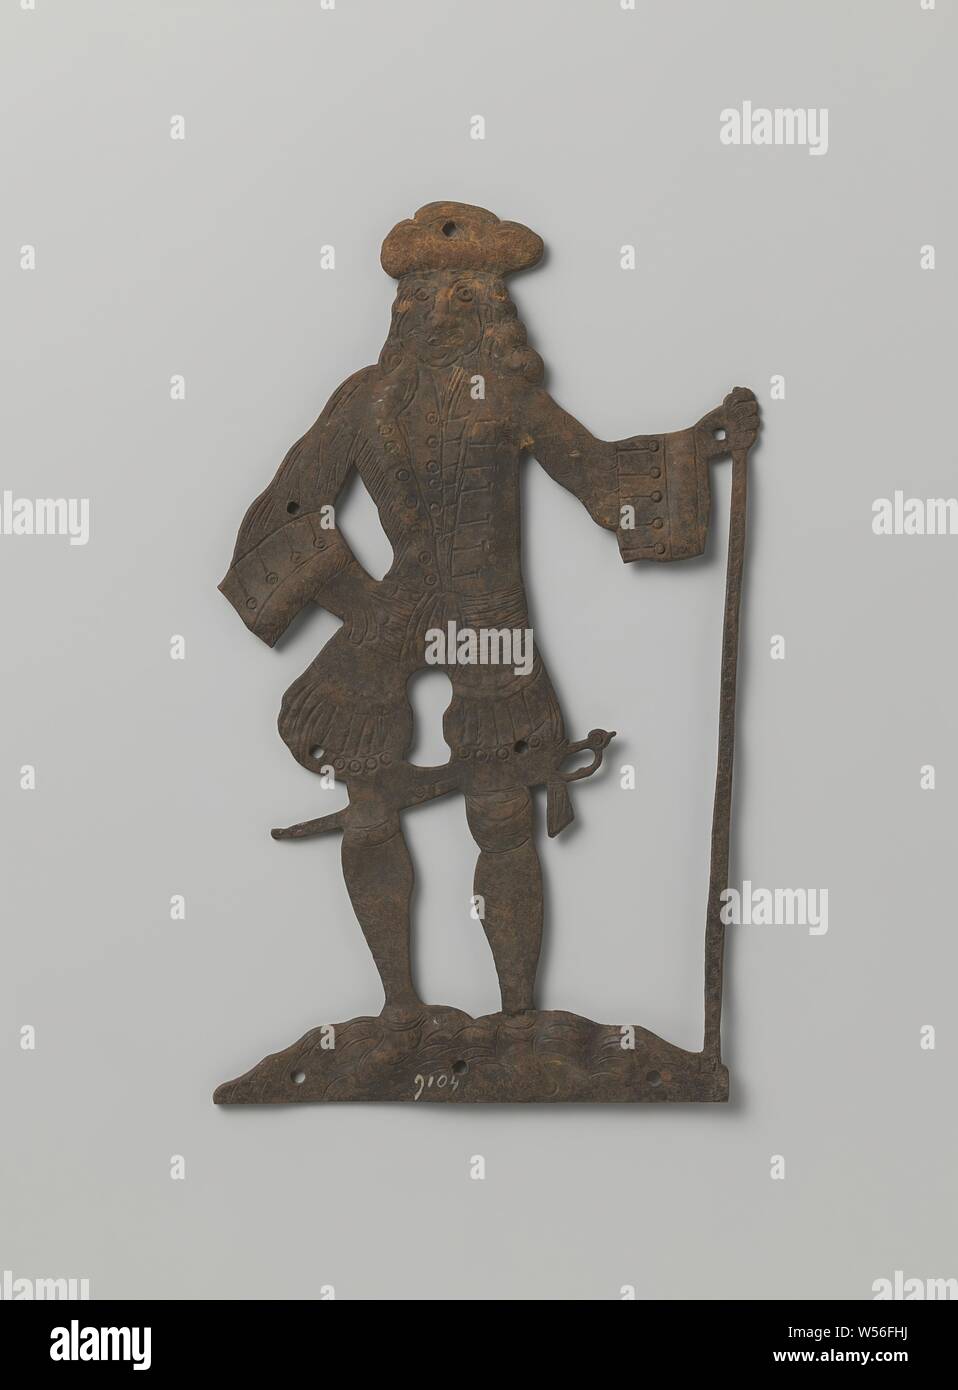 Key plate in the shape of a man, Key plate of iron in the shape of a man. The man with long, loose hair wears a headdress. His jacket has wide cuffs and a double row of buttons on his lapel. Underneath he wears shorts and shoes with a small heel. He holds a stick in his left hand. A sword or saber can be seen behind his knees. The opening of the keyhole is arranged between the upper legs., anonymous, West-Europa, 1675 - 1725, iron (metal), engraving, h 23.9 cm × w 13.7 cm Stock Photo